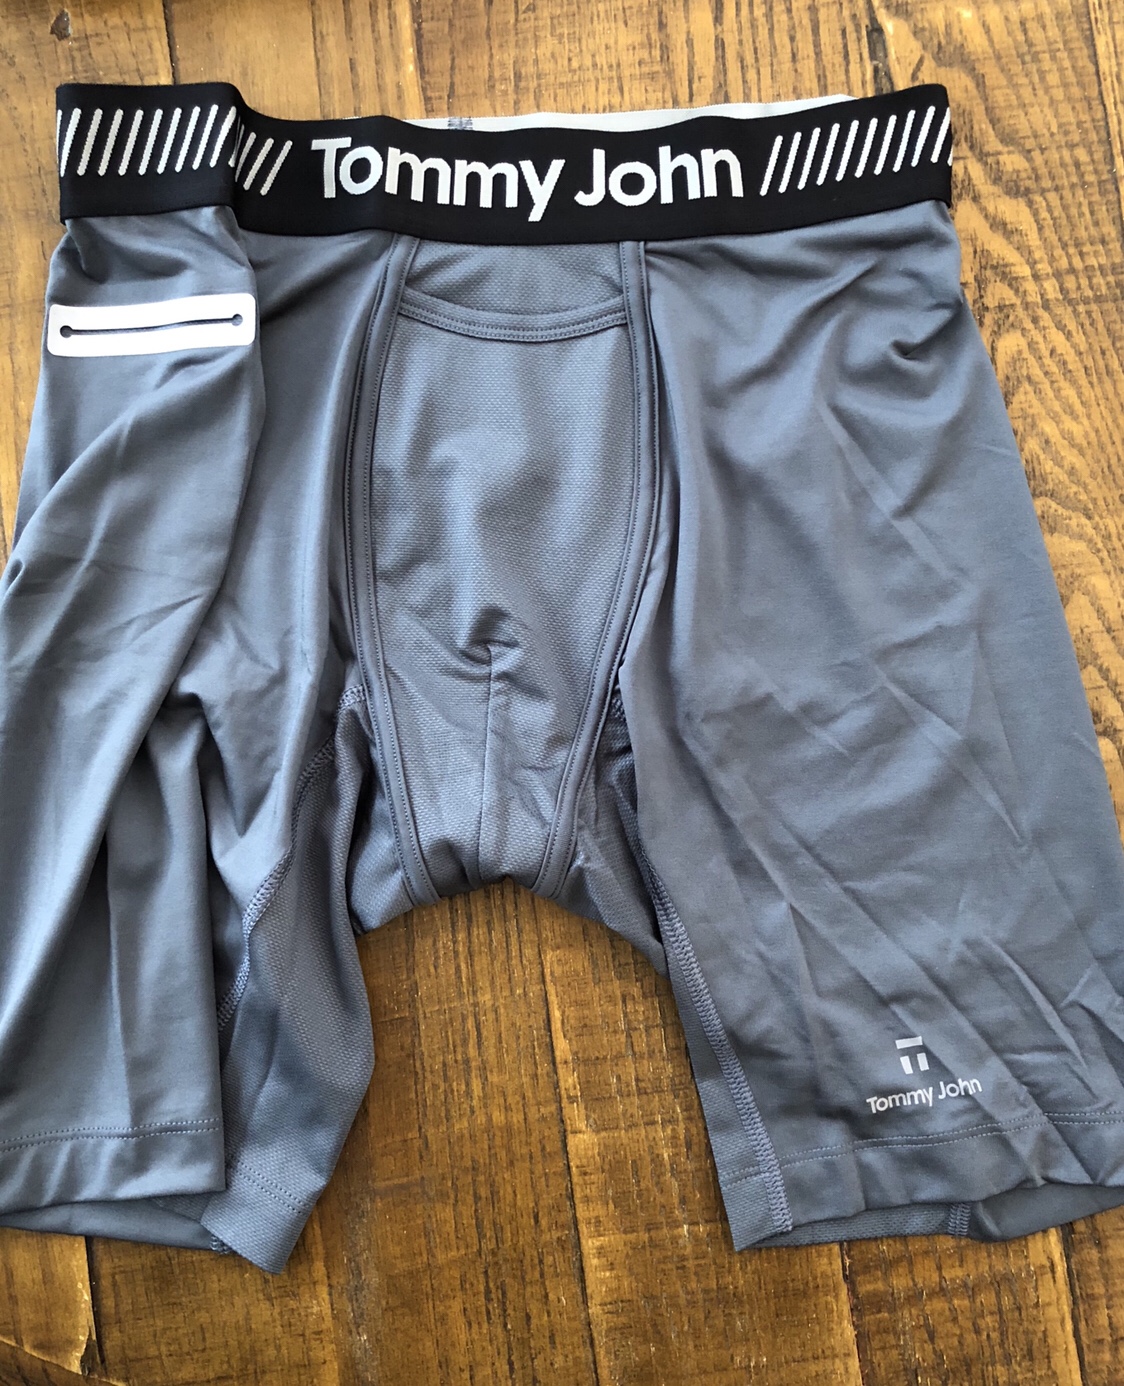 Tommy John Underwear Reviewing - Dr 